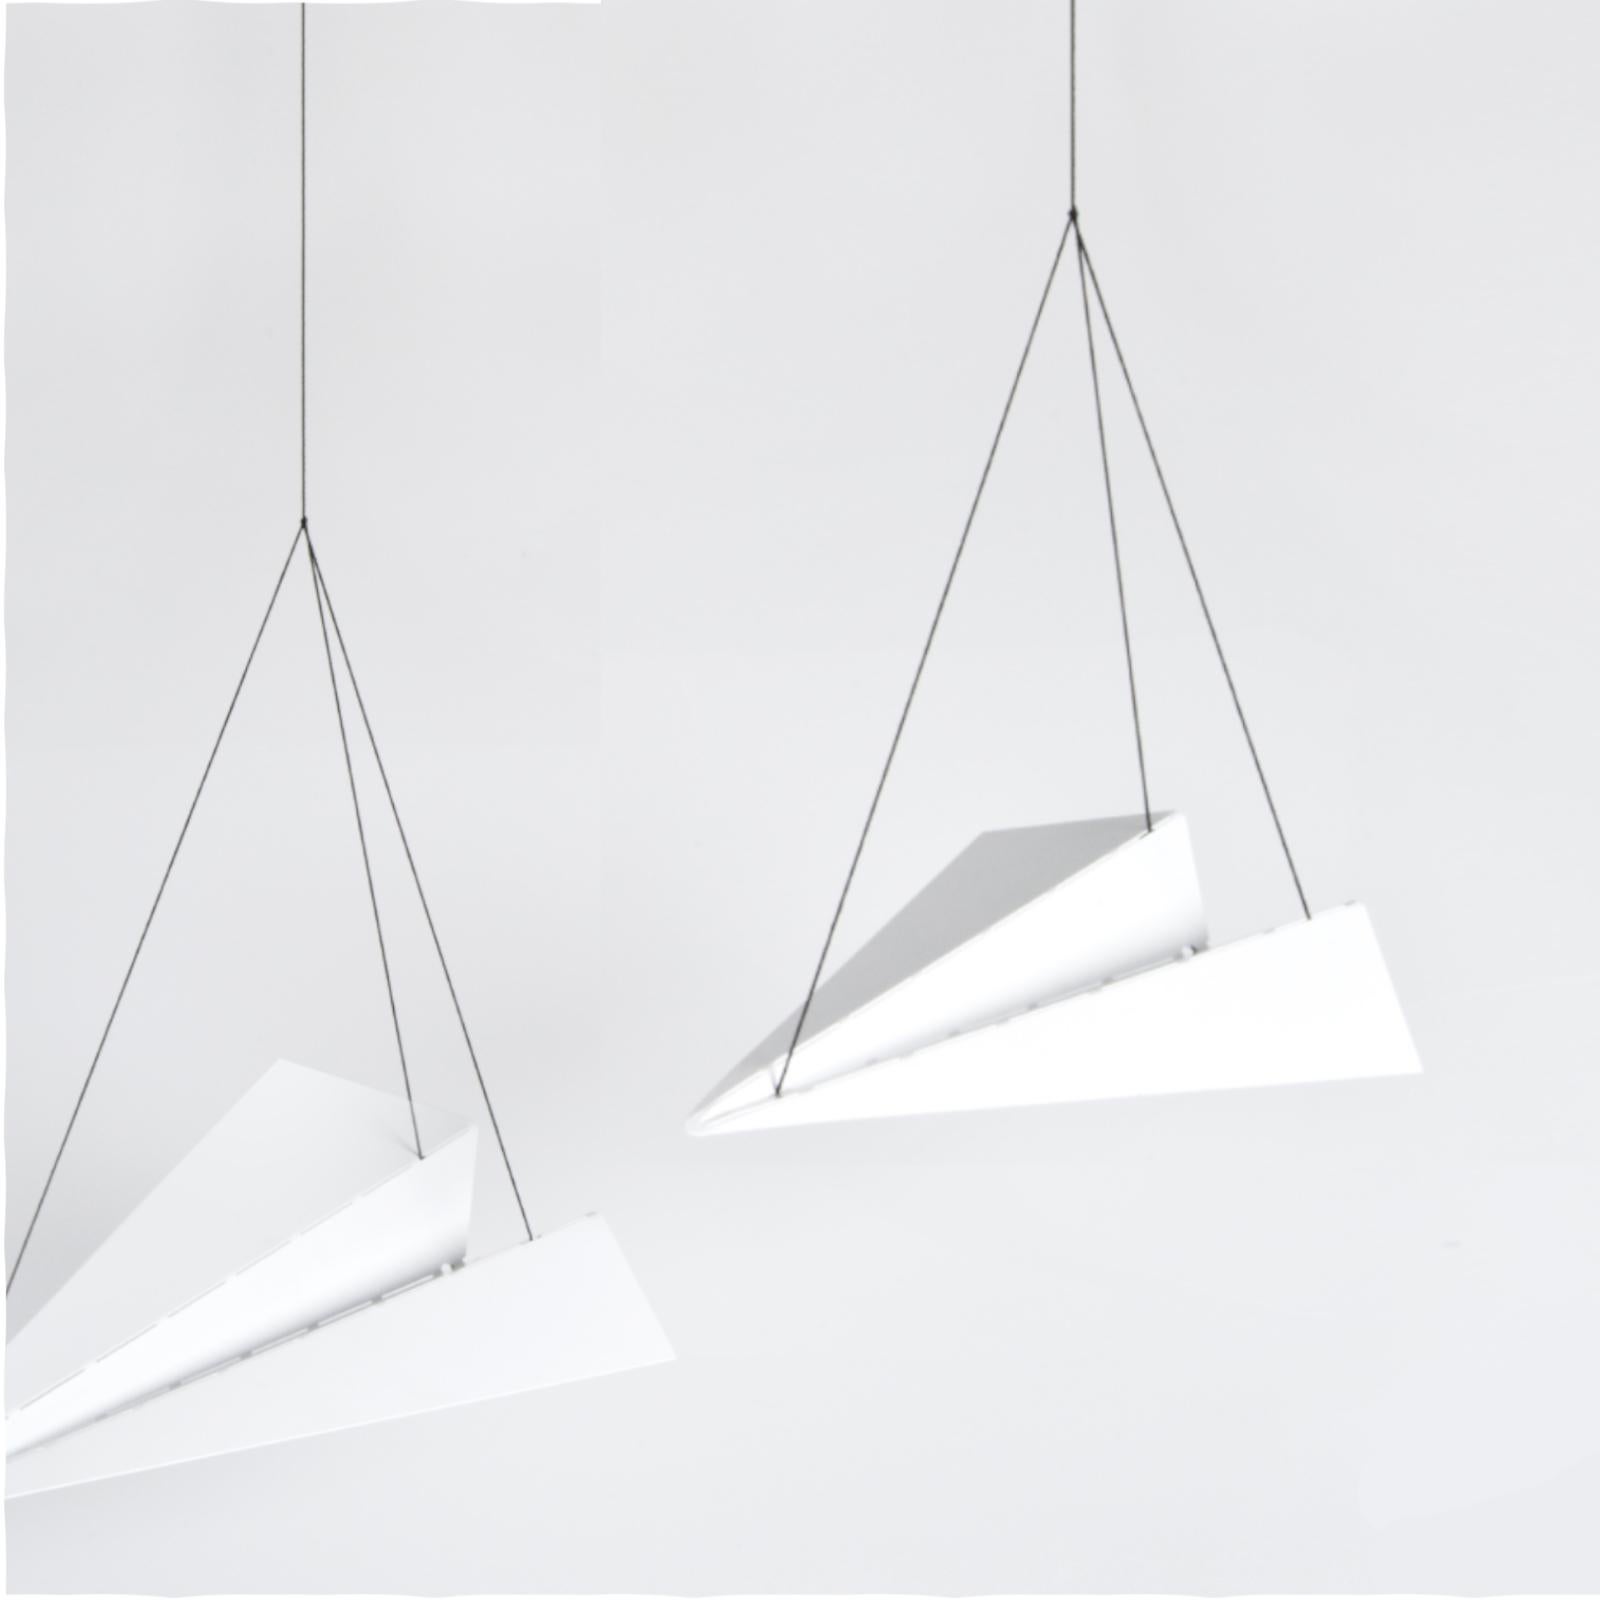 Minimalist 3 Hanging Metal Origami Planes (Contemporary art, sculptural object)